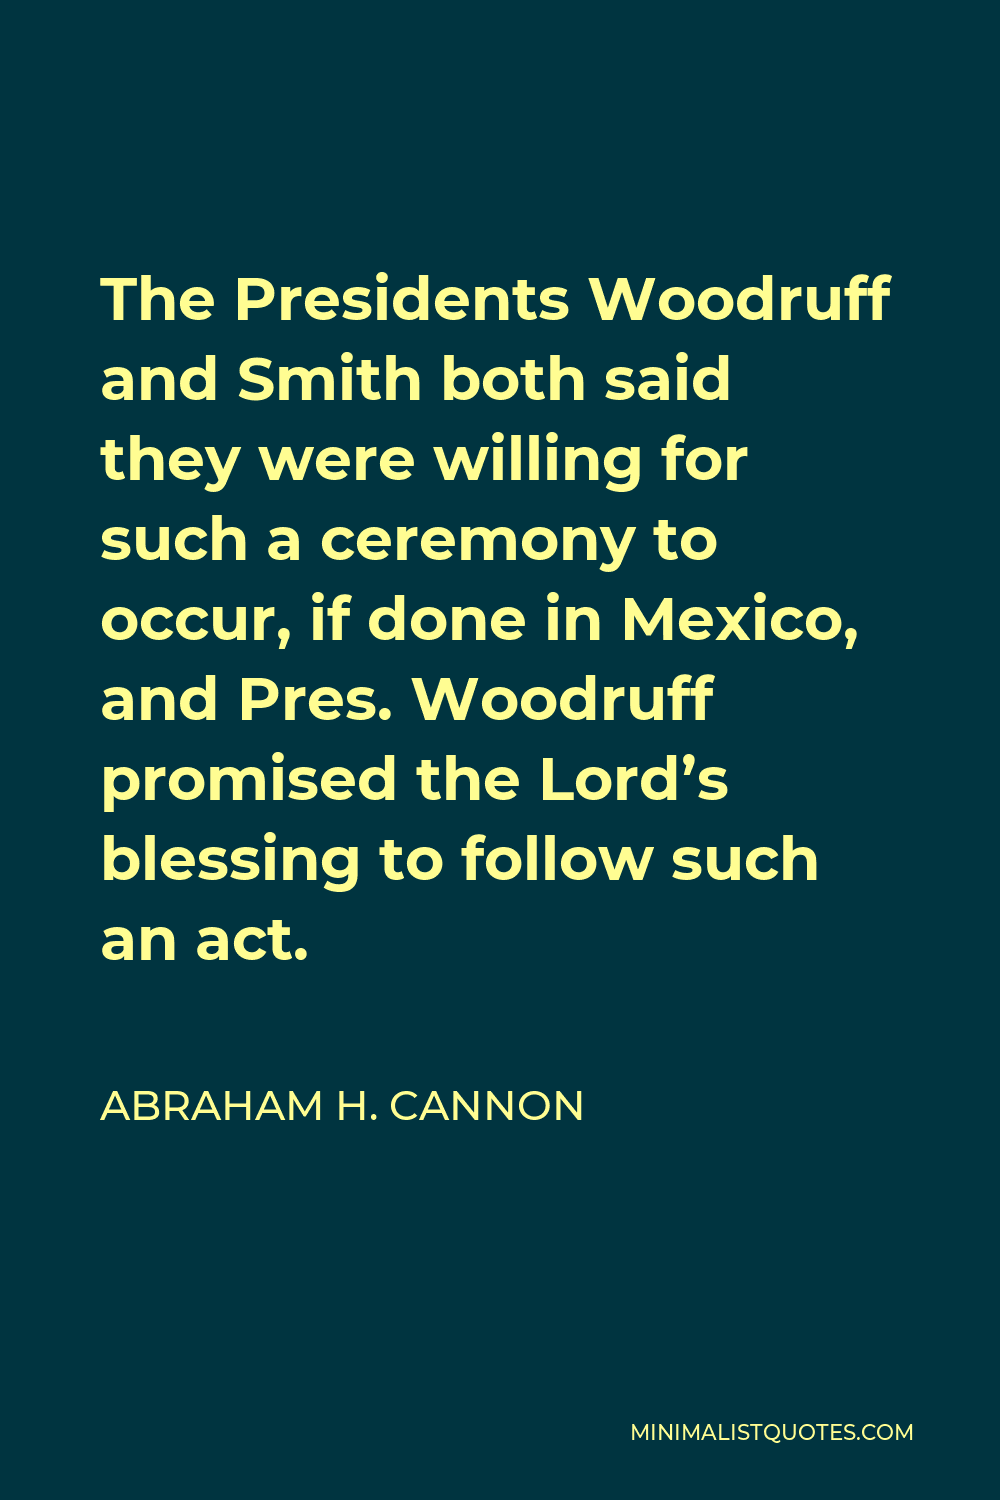 Abraham H. Cannon Quote - The Presidents Woodruff and Smith both said they were willing for such a ceremony to occur, if done in Mexico, and Pres. Woodruff promised the Lord’s blessing to follow such an act.